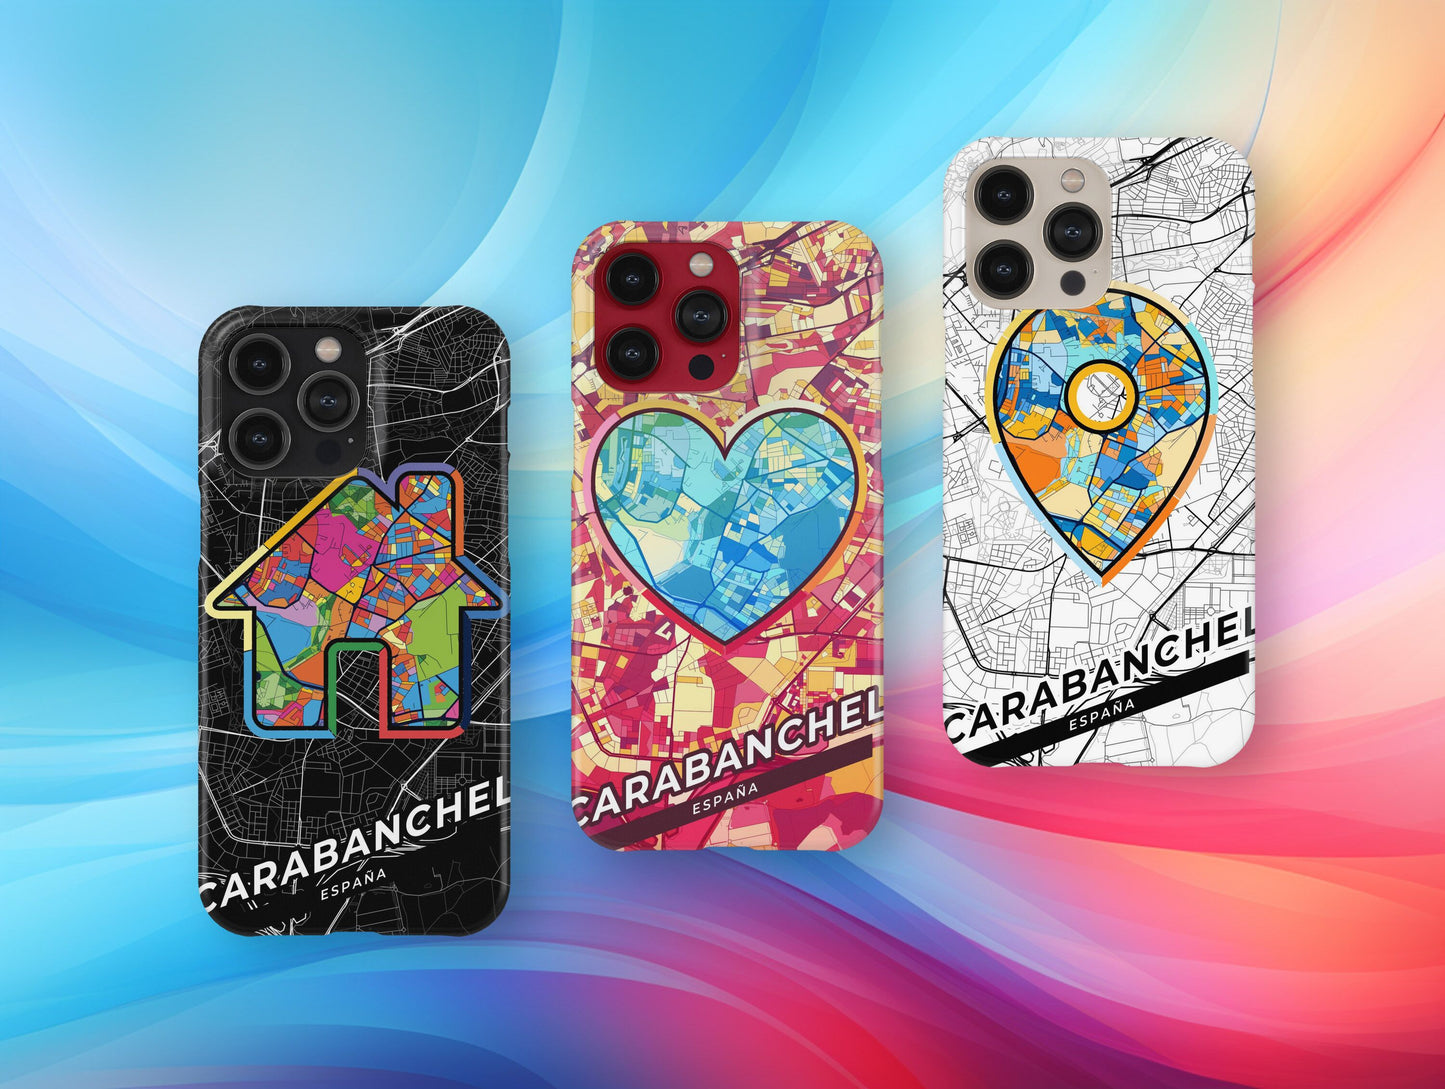 Carabanchel Spain slim phone case with colorful icon. Birthday, wedding or housewarming gift. Couple match cases.